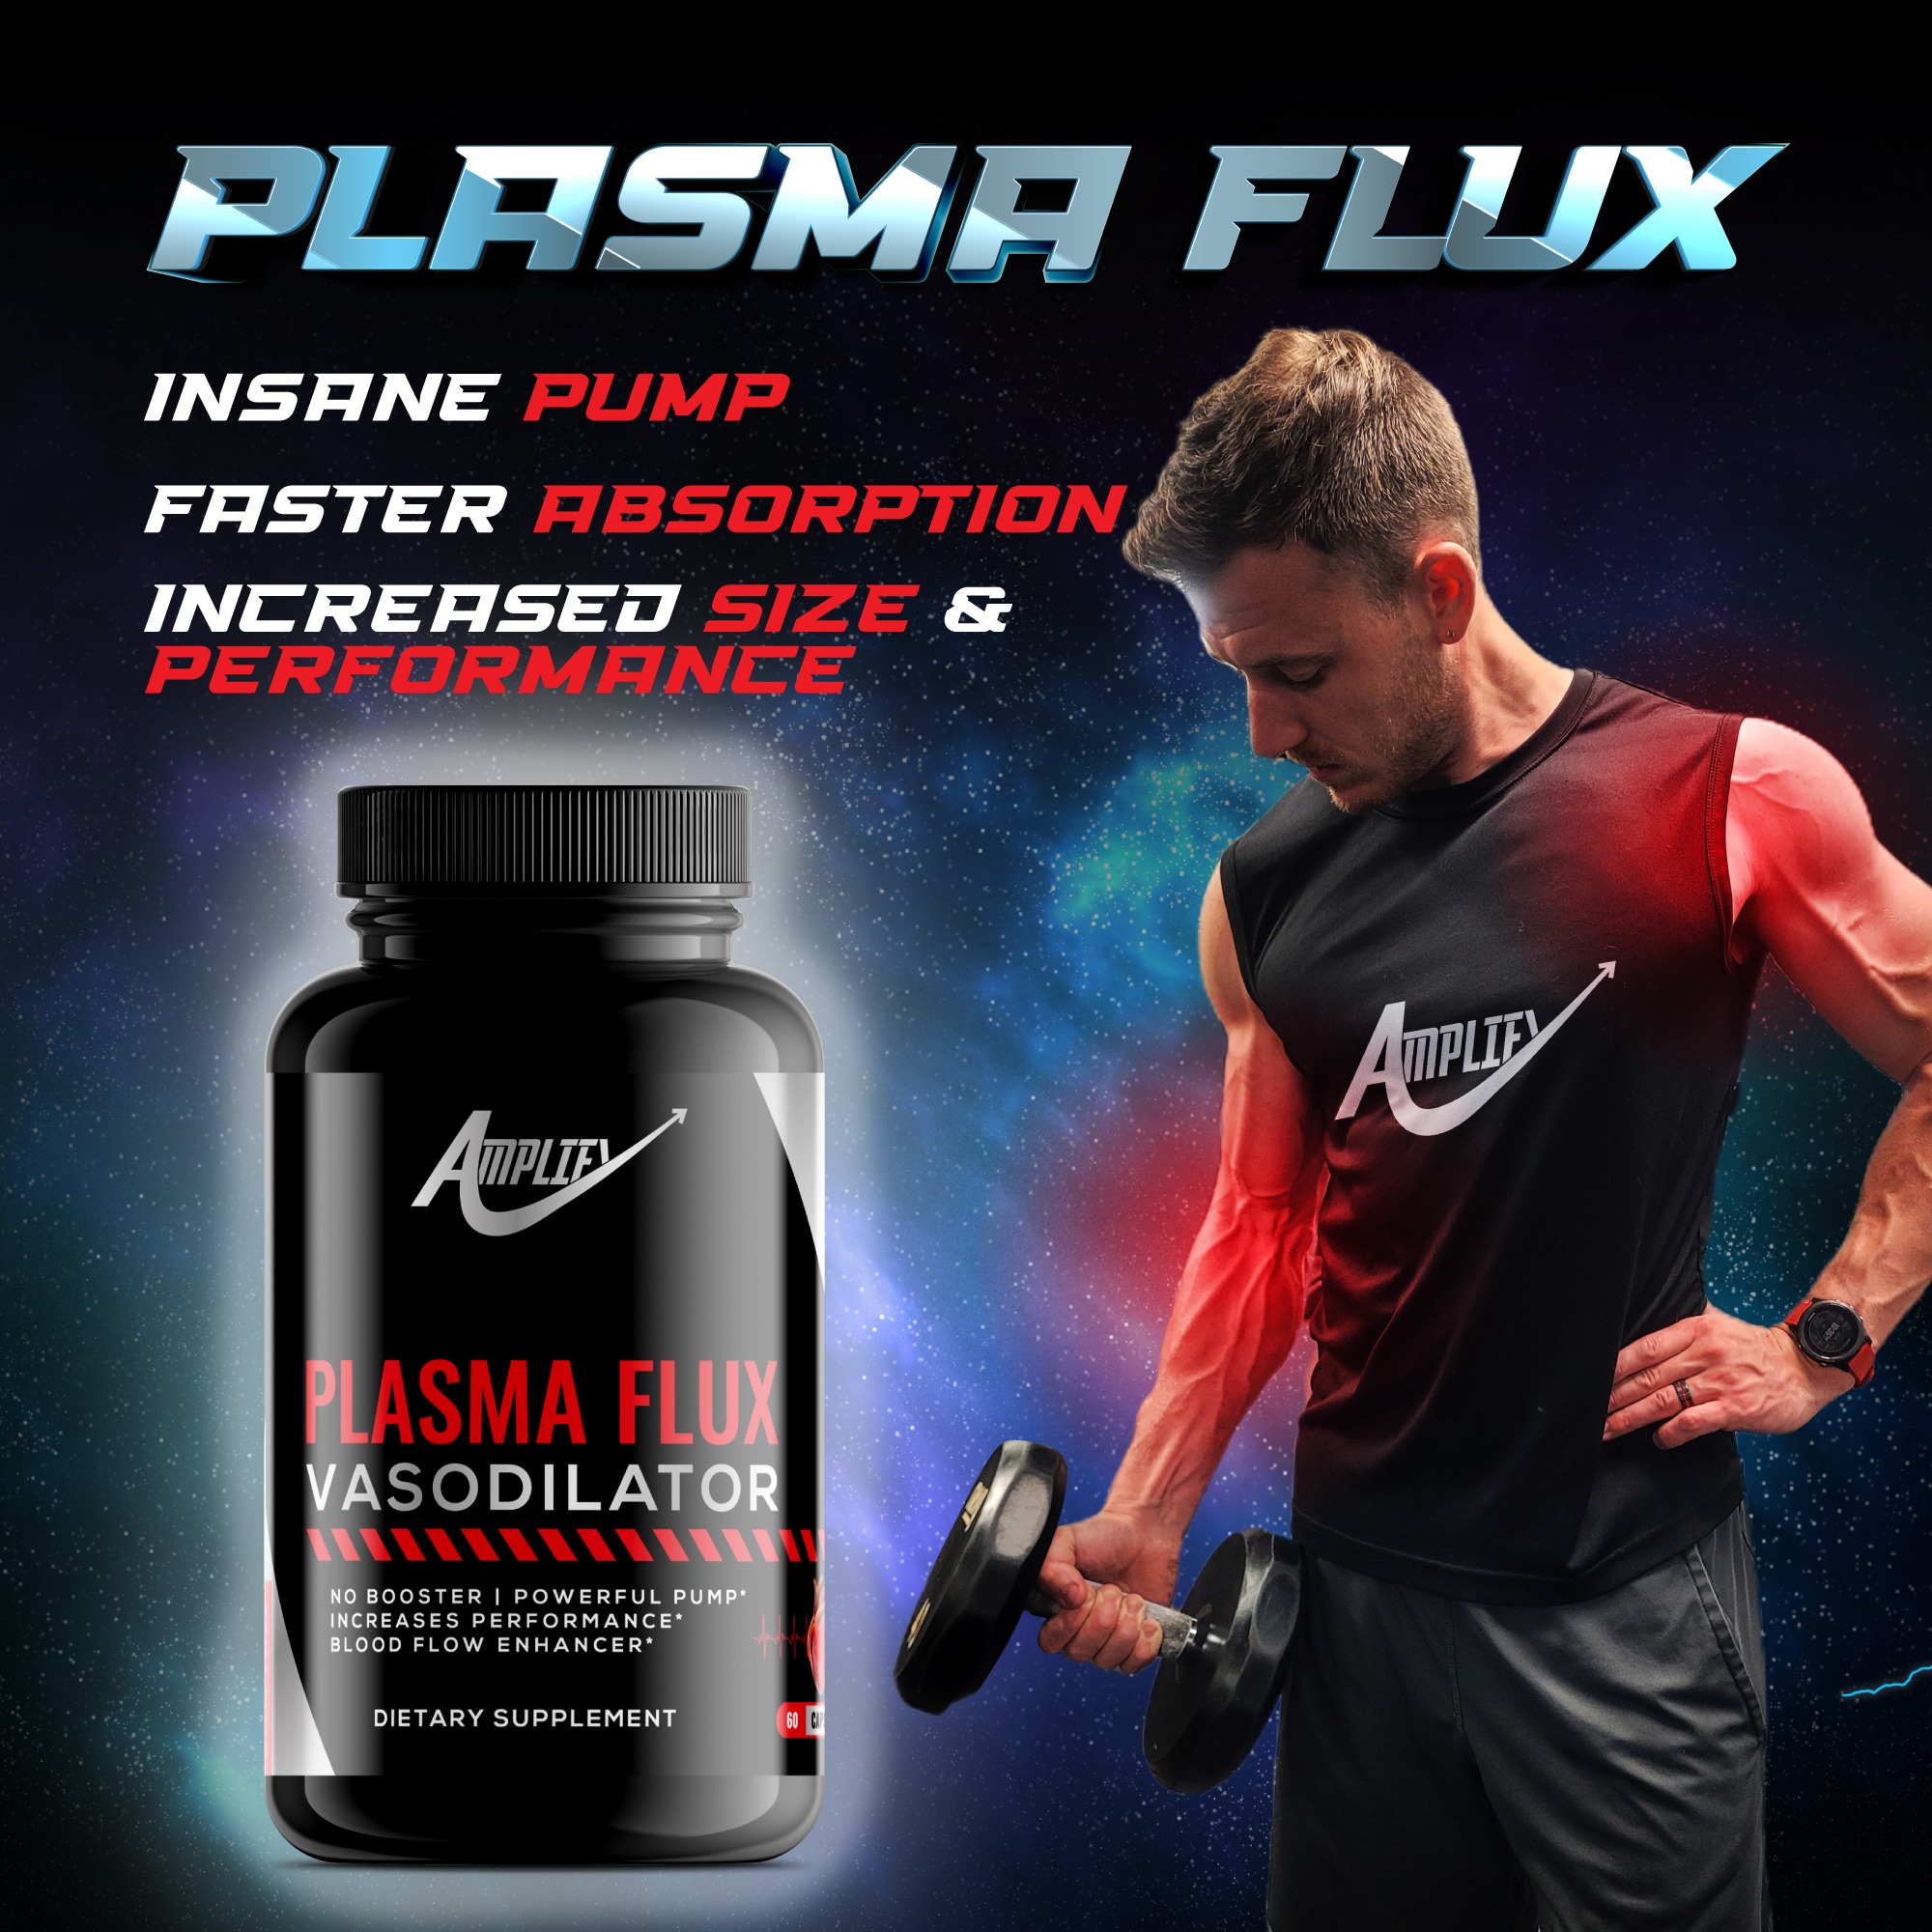 - Insane pump - Faster absorption - Increased size & performance  Plasma Flux is an effective vasodilator, promoting blood flow around your body for improved function and health. Ensure your tissues get supplied with all their nutrients and assist in waste removal by improving circulation. Additional benefits include lower blood pressure and improved cognition.  Combine with ‘GET AMPED’ for the best results prior to exercise.  Arginine - A precursor to endothelial-nitric oxide synthase (eNOS) production. In turn, nitric oxide released relaxes the smooth muscle of the vascular system to produce vasodilation. It may also act on muscle tissue to increase protein synthesis via iNOS mTOR activation, stimulate mitochondrial biogenesis via nNOS activation and fatty acid oxidation in adipose cells.  Arginine AKG - Arginine Alpha Ketoglutarate is a salt of the amino acid arginine and alpha-ketoglutaric acid  Citrulline - L- Citrulline increases L-arginine circulation in the blood to a greater extent than oral arginine supplementation alone. It bypasses arginase enzymes in the intestines and liver resulting in higher concentrations serving as substrates for endothelial-nitric oxide synthase (eNOS) production.  Citrulline malate - Citrulline plus malate acid which increases absorption rates